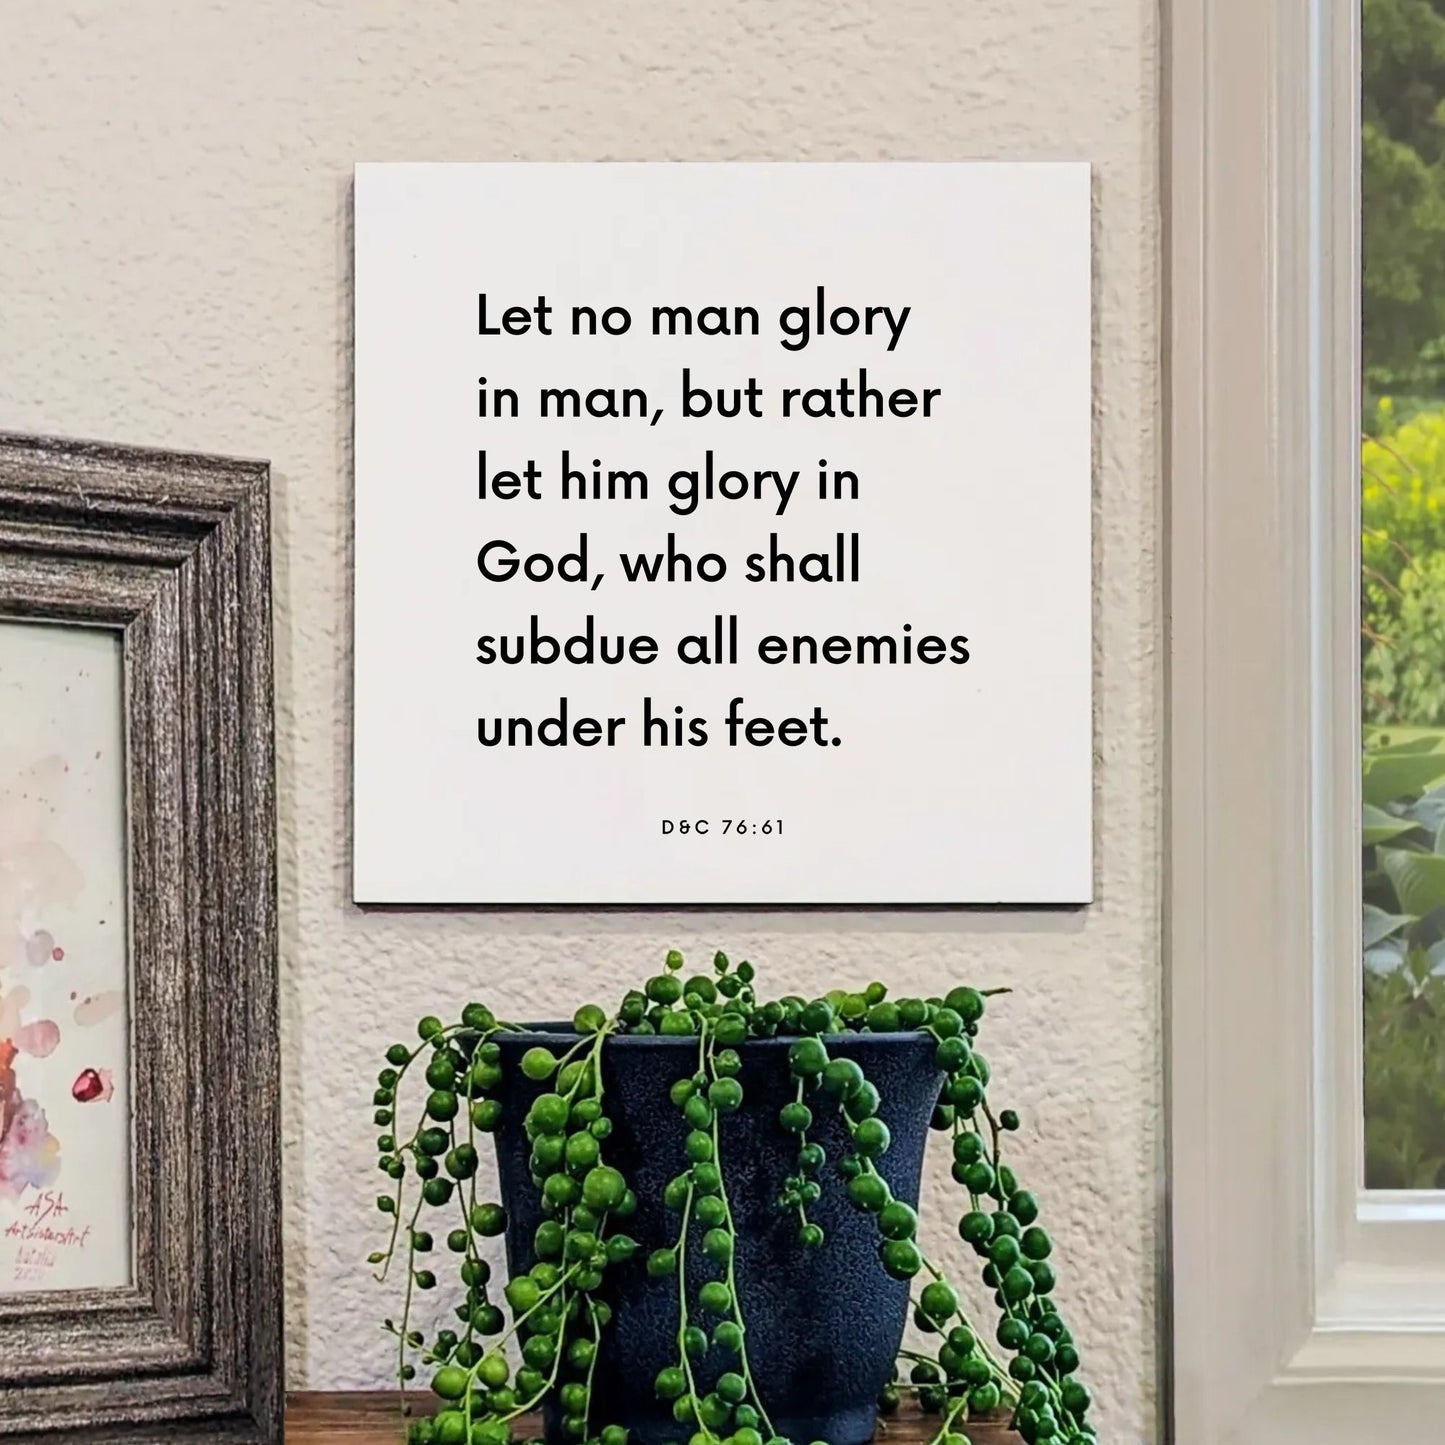 Window mouting of the scripture tile for D&C 76:61 - "Let no man glory in man, but rather let him glory in God"